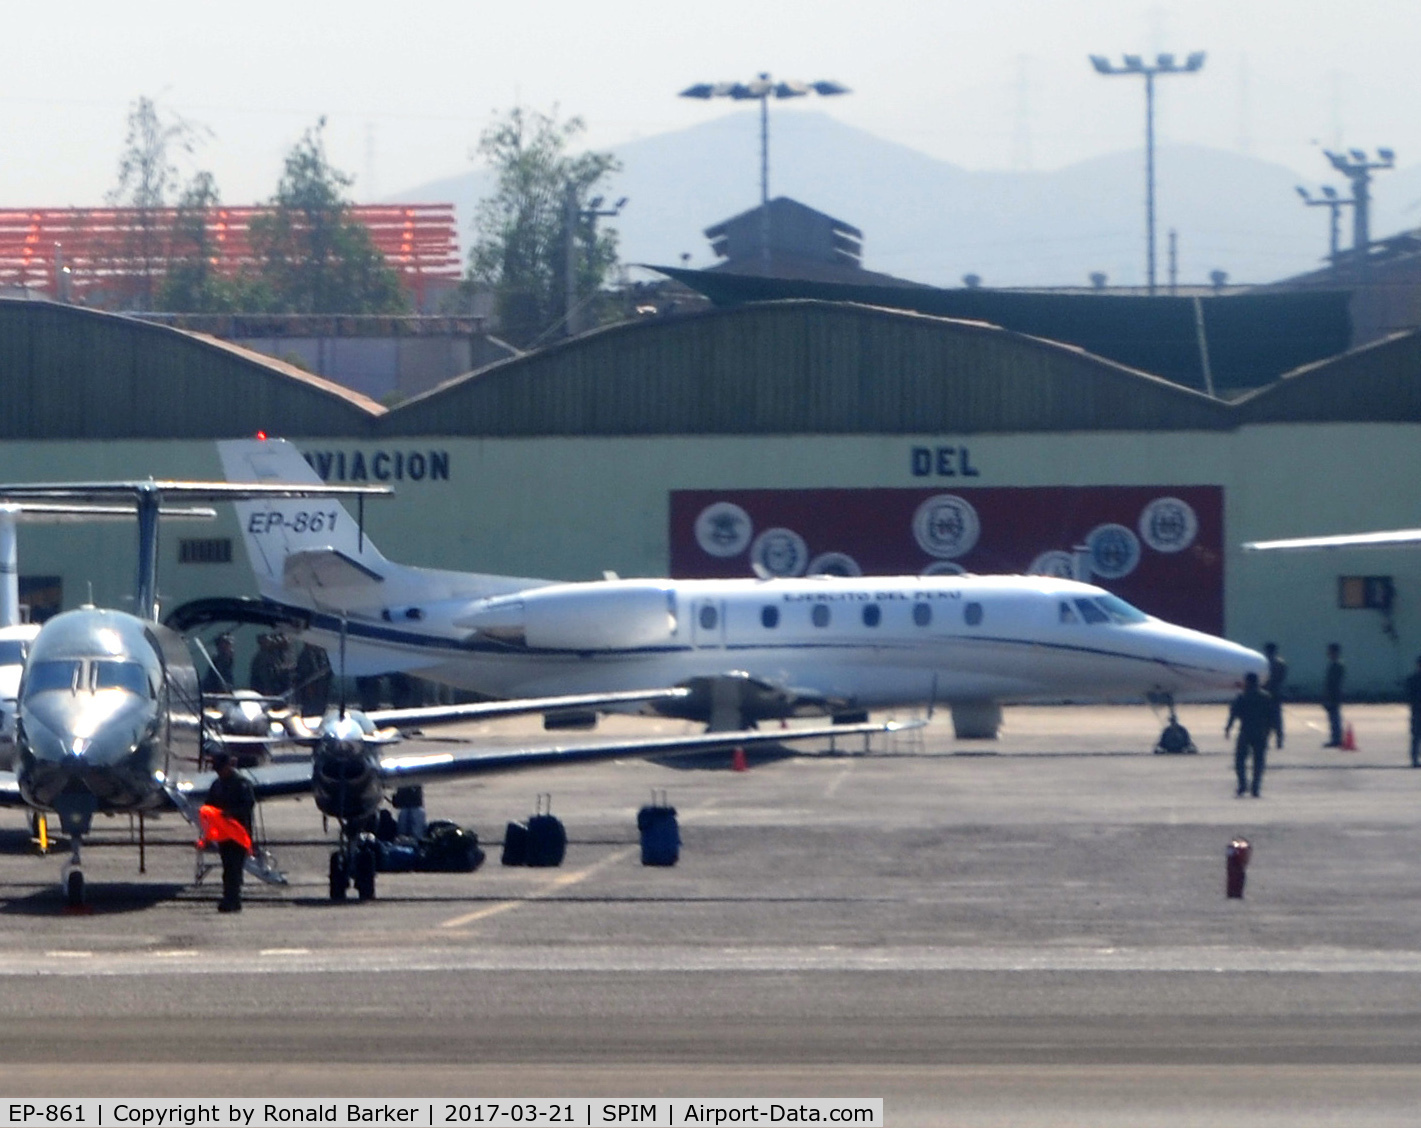 EP-861, 2007 Cessna 560XL C/N 560-5679, Parked Lima